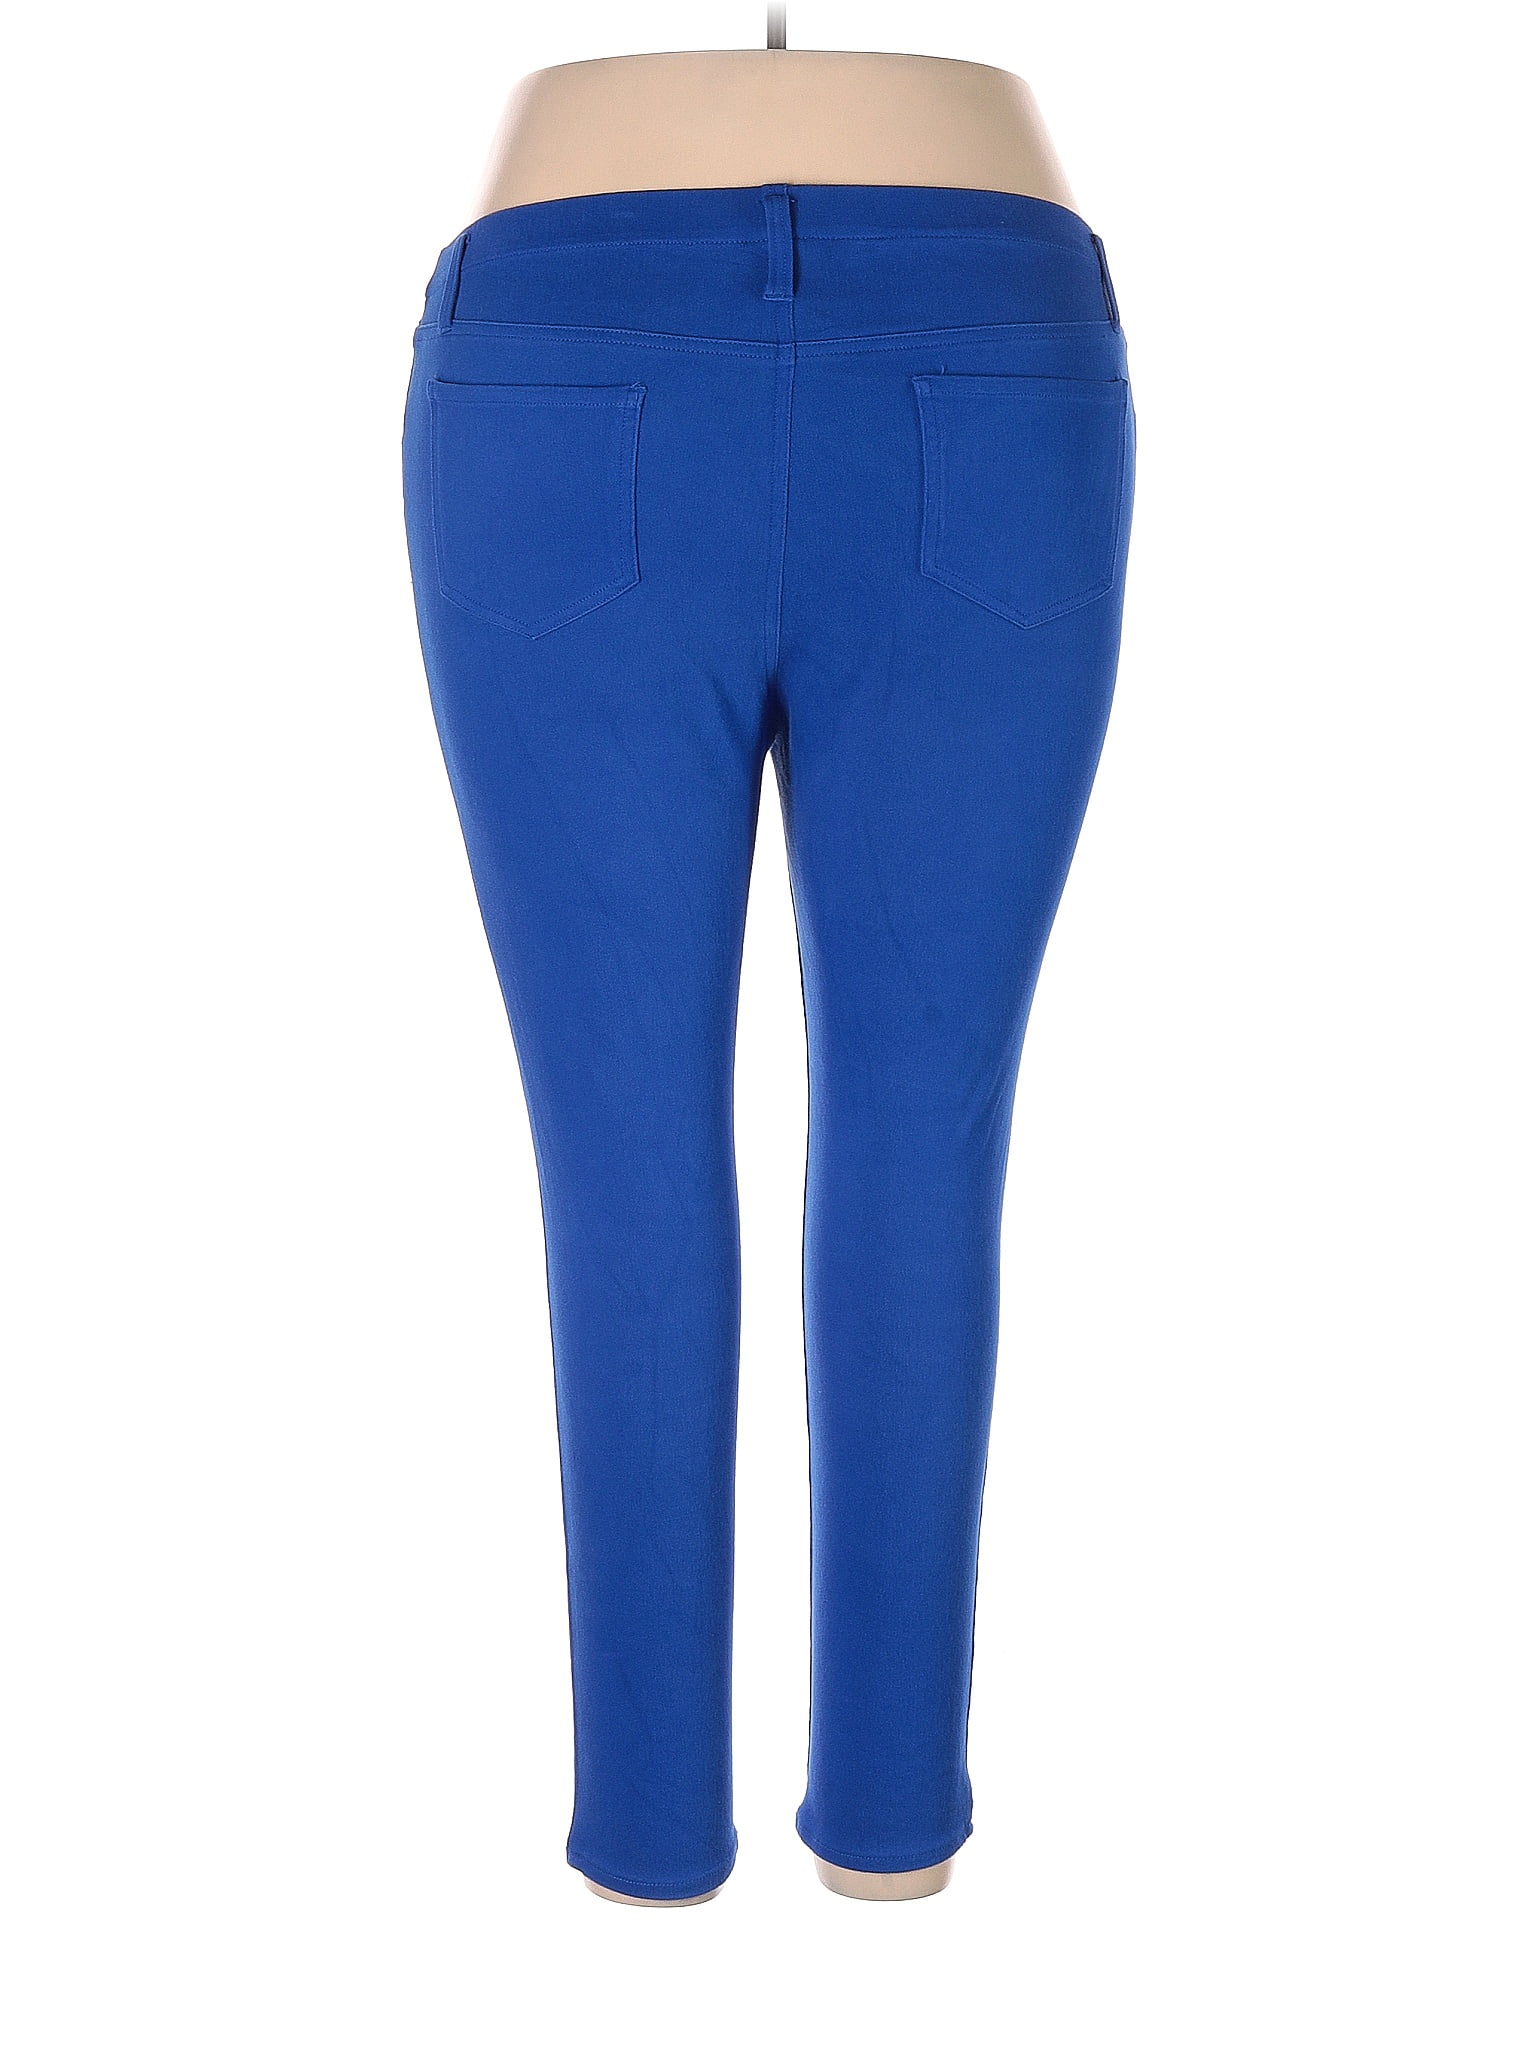 Faded Glory Solid Sapphire Blue Jeggings Size 2X (Plus) - 47% off